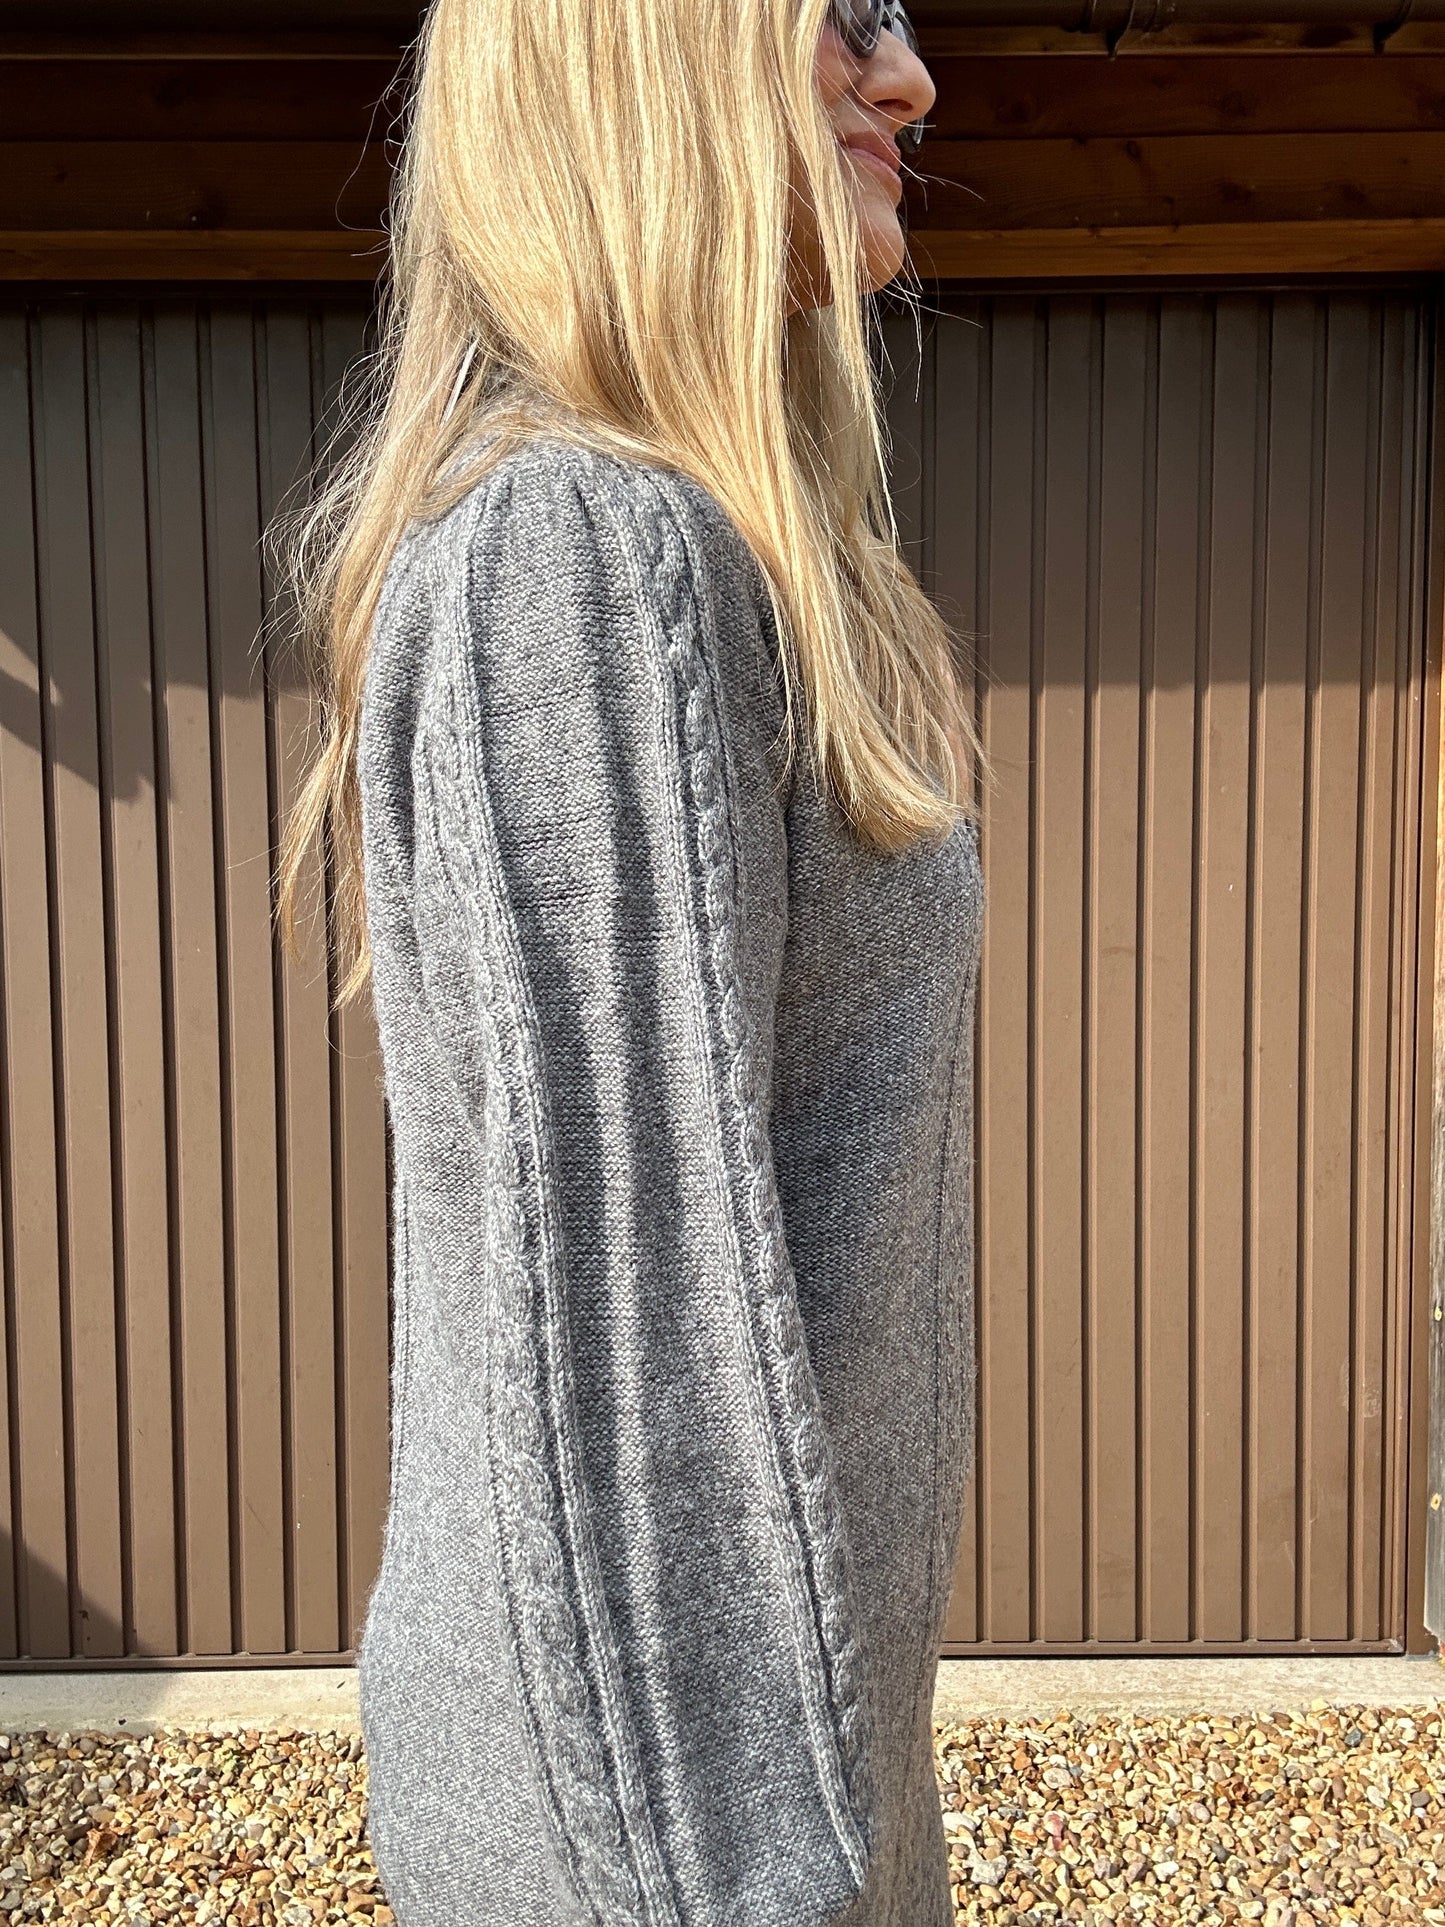 Grey Cable Knitted Dress